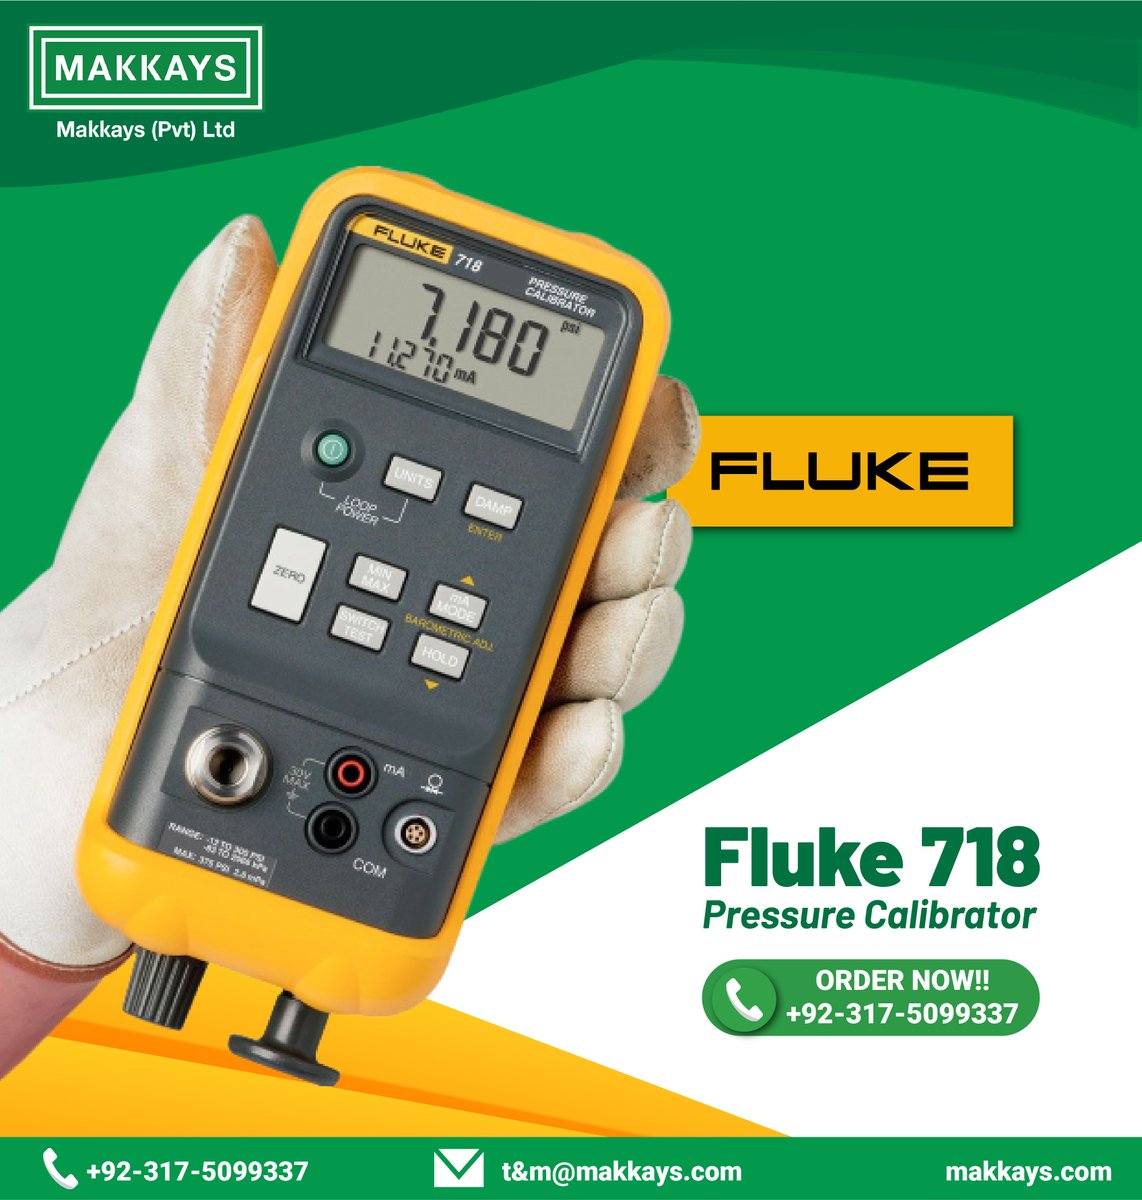 The #Fluke 718 Pressure Calibrator provides a total pressure calibration solution for transmitters, gauges, and switches.
#electricalequipment #electricalequipment #technicalservices #testinginstruments #testandmeasurement #electricservices #mechanicalservices #equipment #makkays